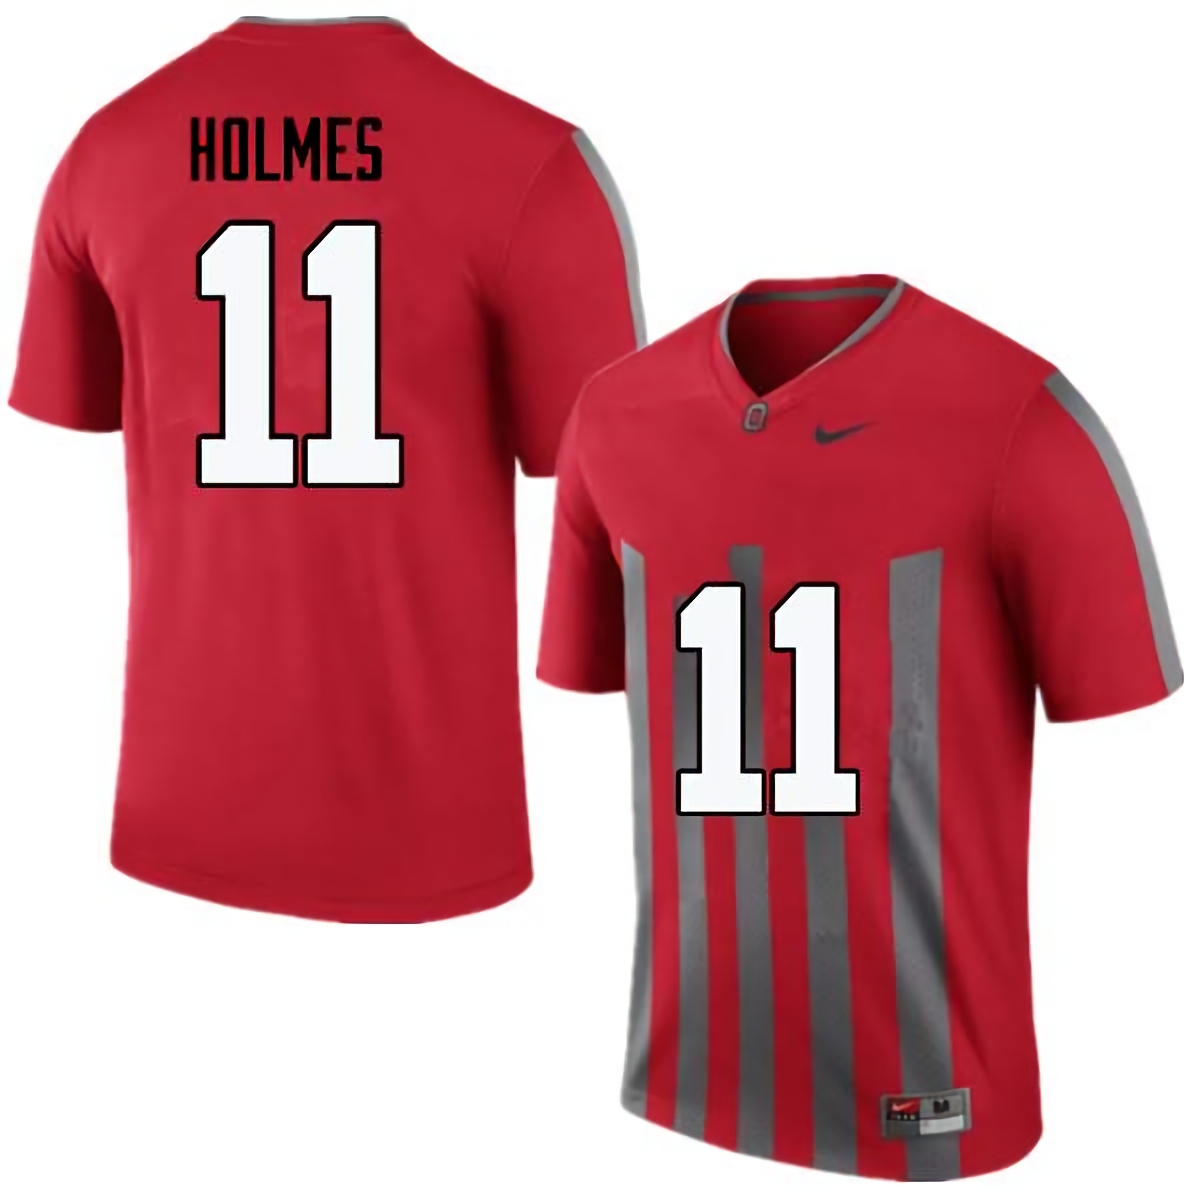 Jalyn Holmes Ohio State Buckeyes Men's NCAA #11 Nike Throwback Red College Stitched Football Jersey DSI6056XM